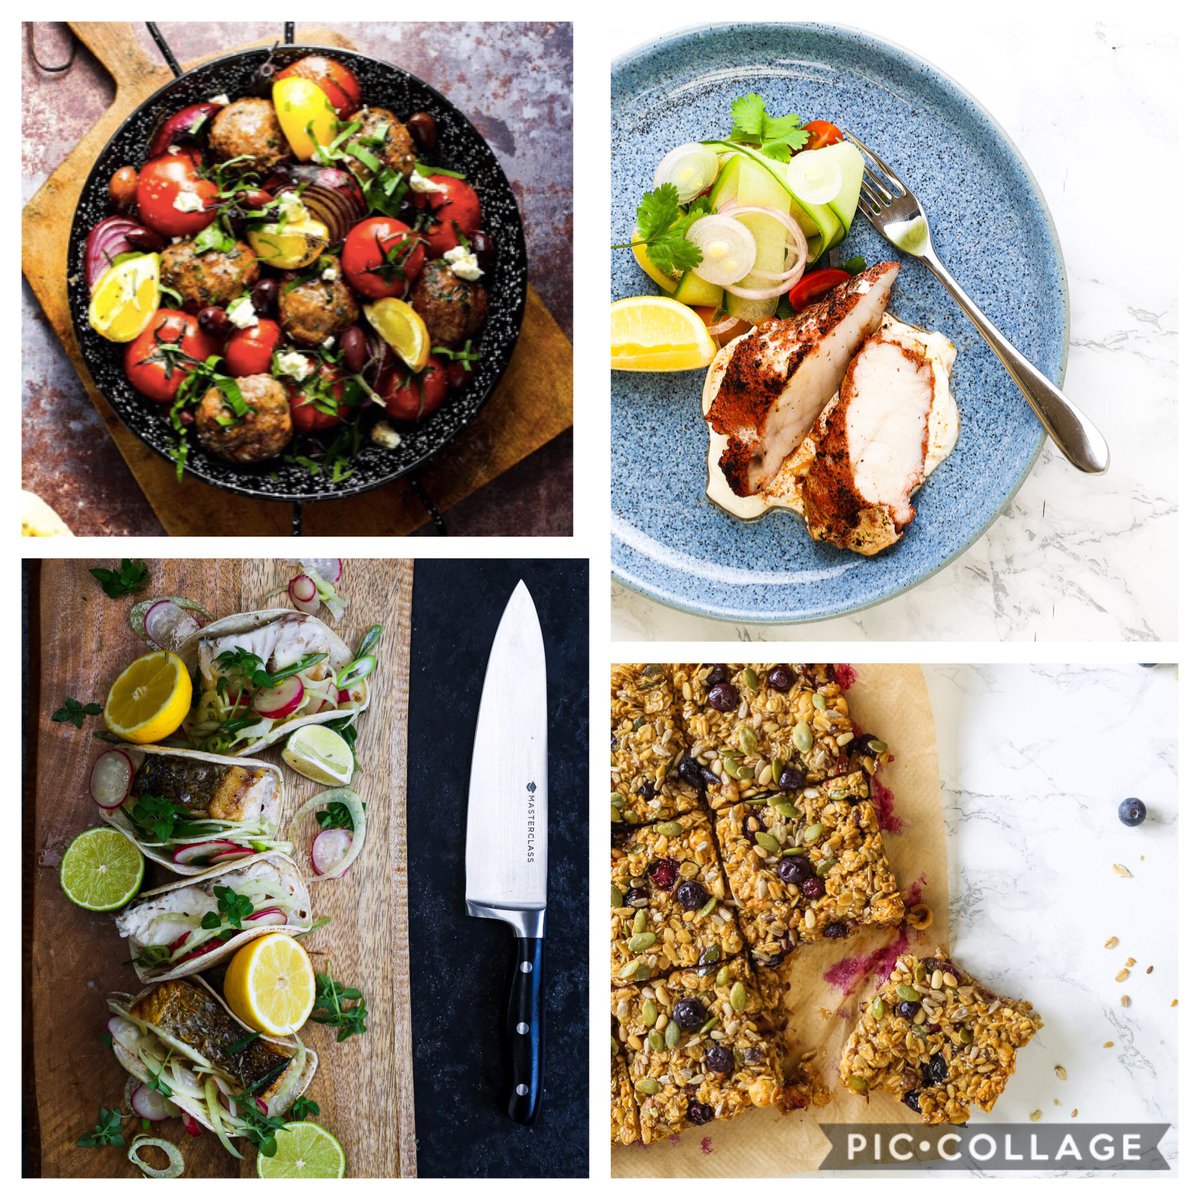 #HealthyEatingWeek Healthy food can be bright, colourful a full of amazing flavours! What are your favourite healthy recipes? Let us know with #healthyrecipes Check out simplygoodfoodtv.com for recipes! @Petersidwell #ingredients #healthy #food #delicious #recipes #cooking